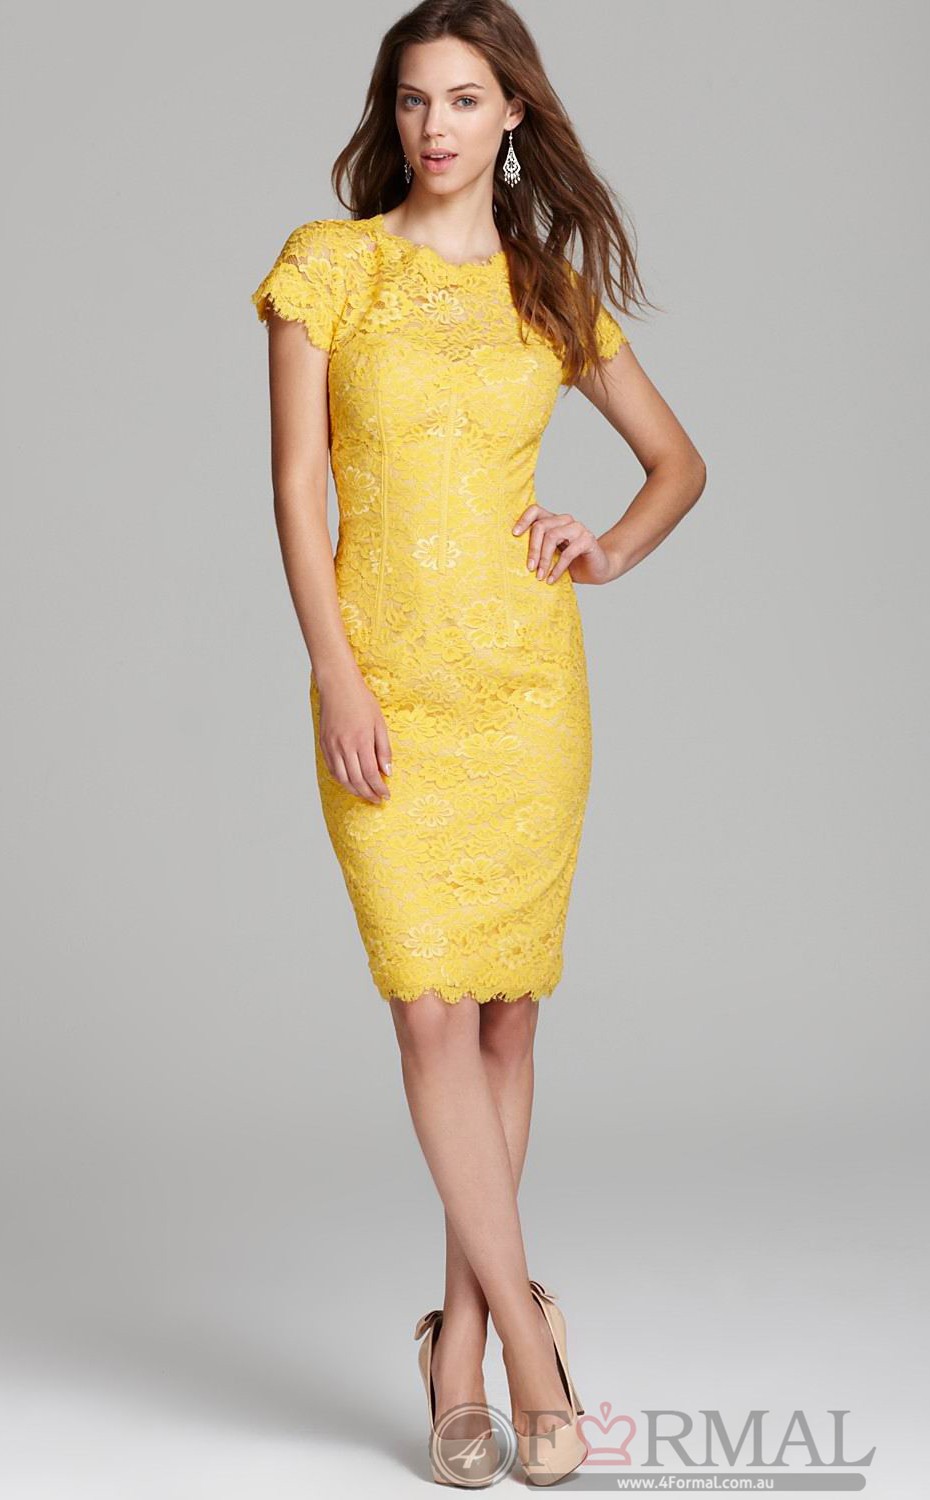 Yellow Lace Dress With Sleeves - Help You Stand Out